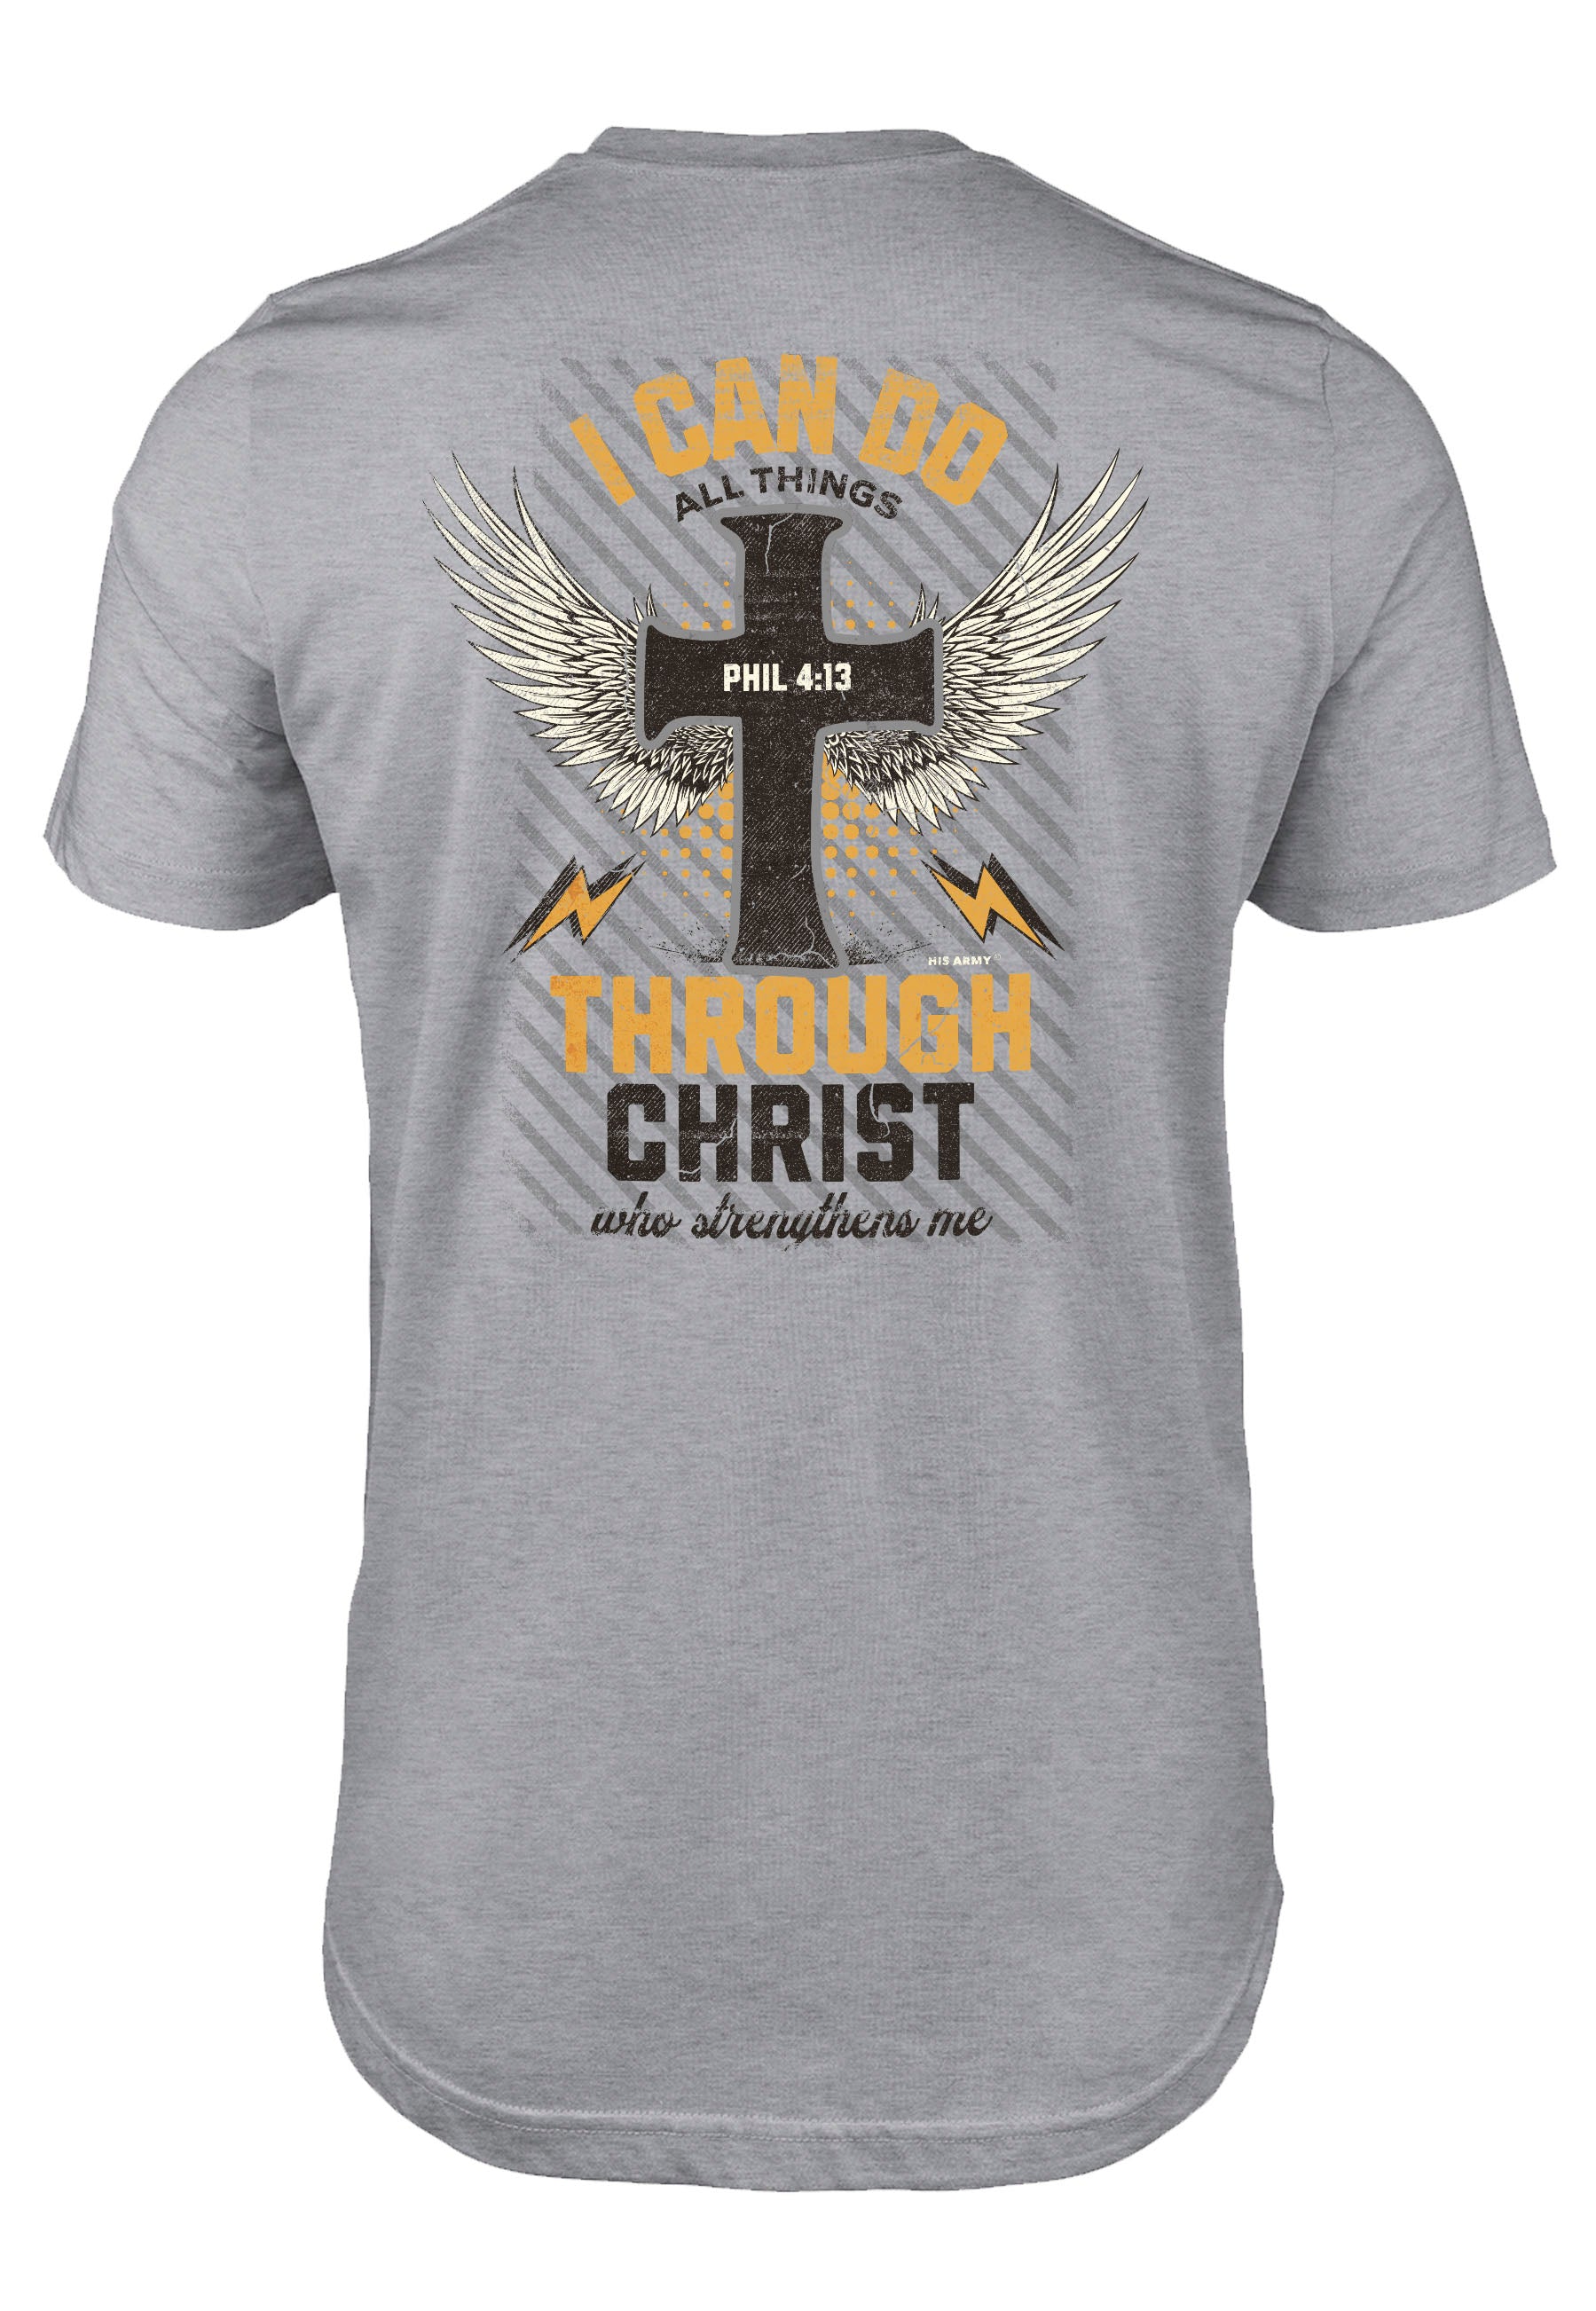 I can do all things through Christ who strengthens me t-shirt